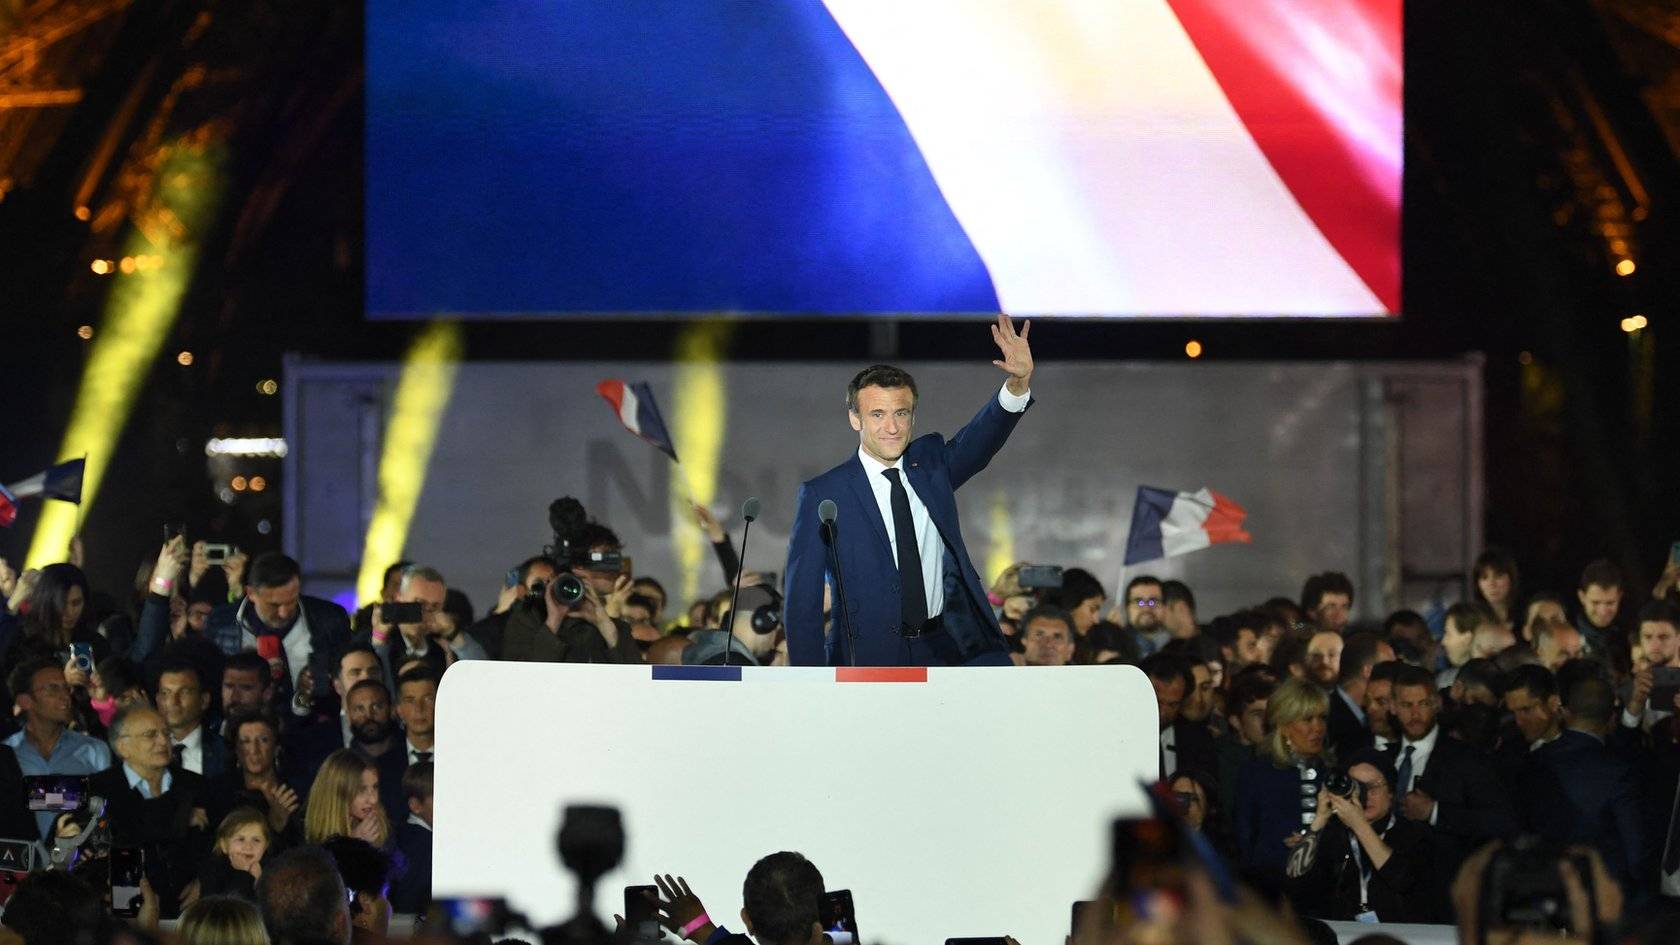 As it happened: Macron vows to govern for all after election victory